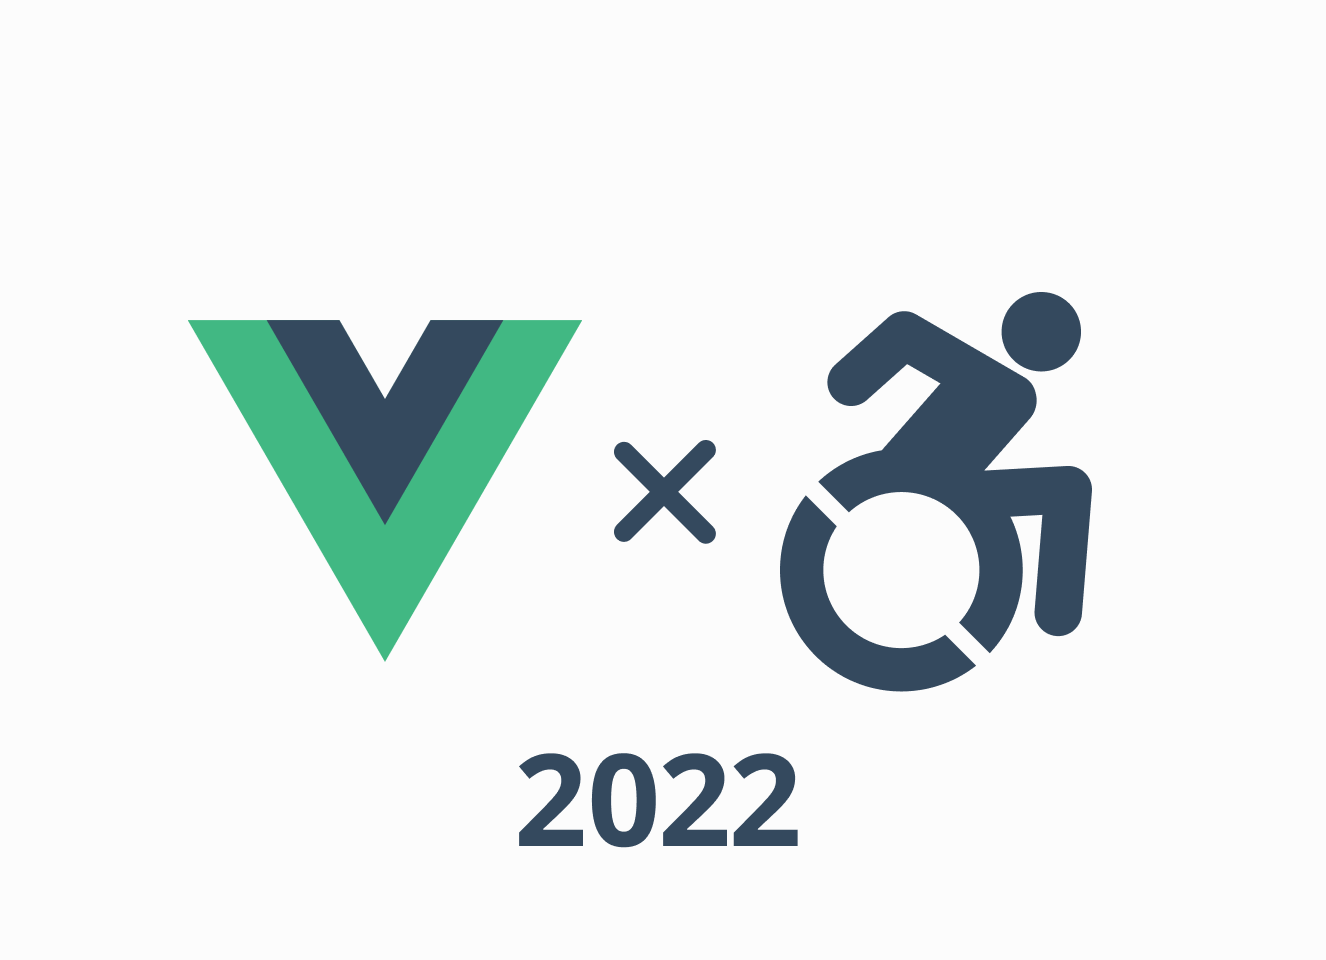 Thumbnail: To make accessible components in Vue.js - 2022